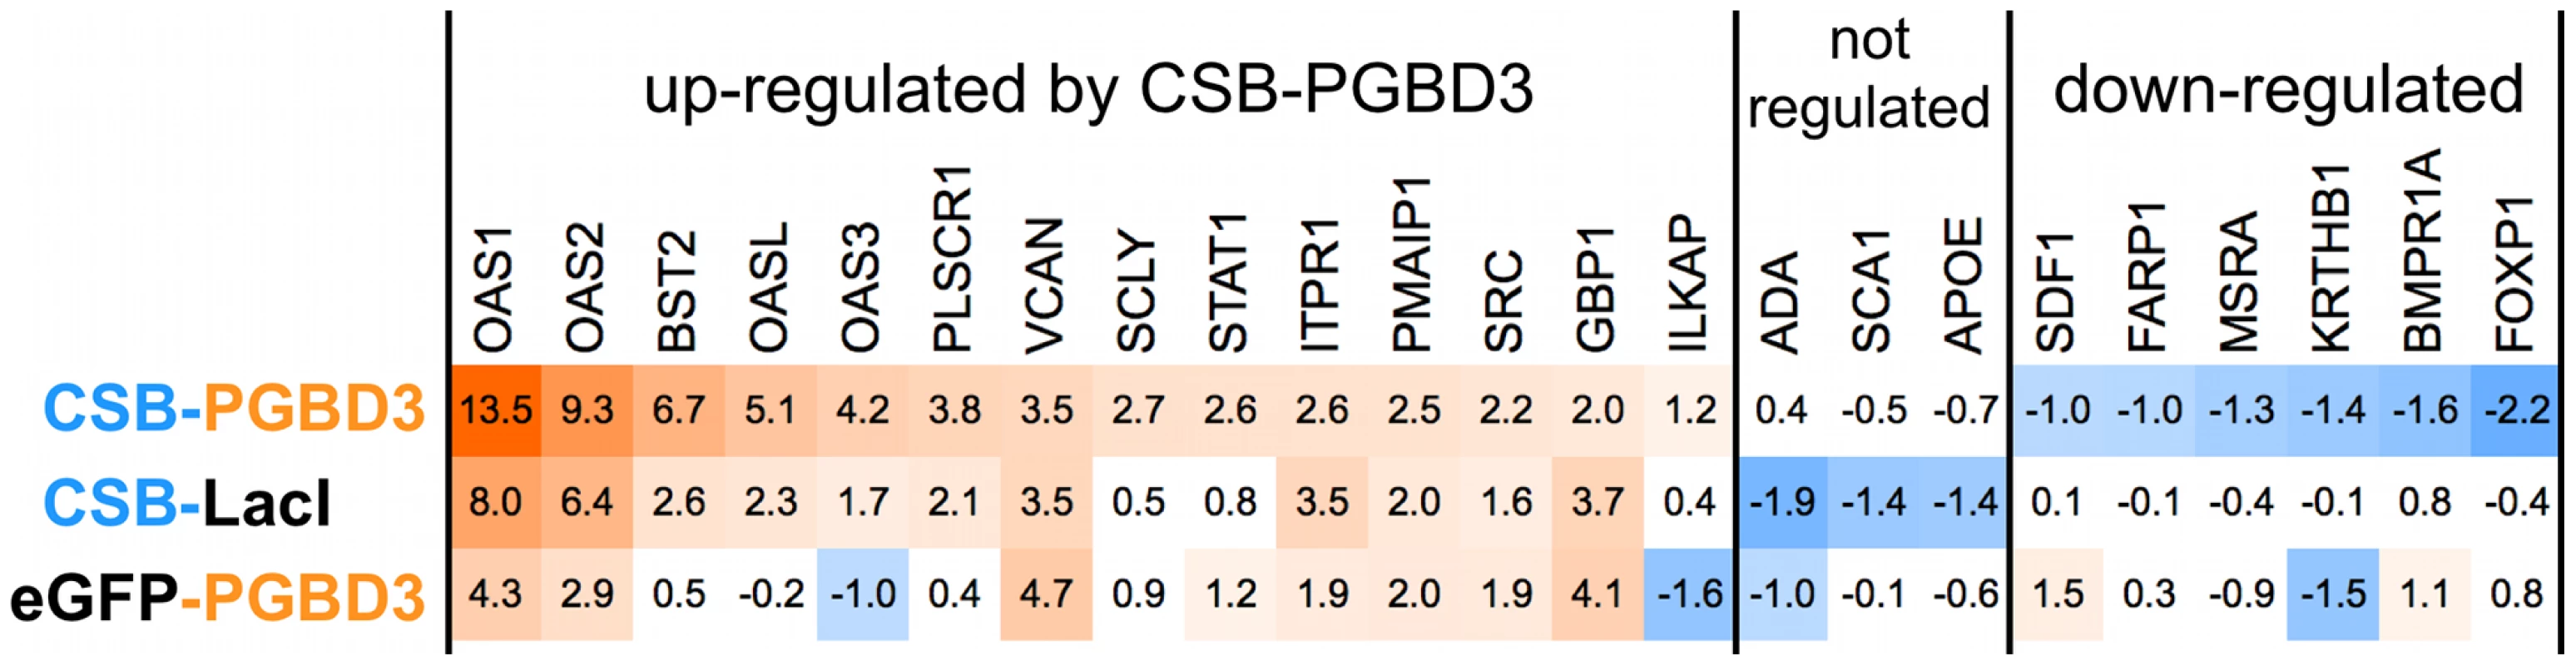 CSB-LacI and eGFP-PGBD3 induce partial up-regulation of genes regulated by CSB-PGBD3.